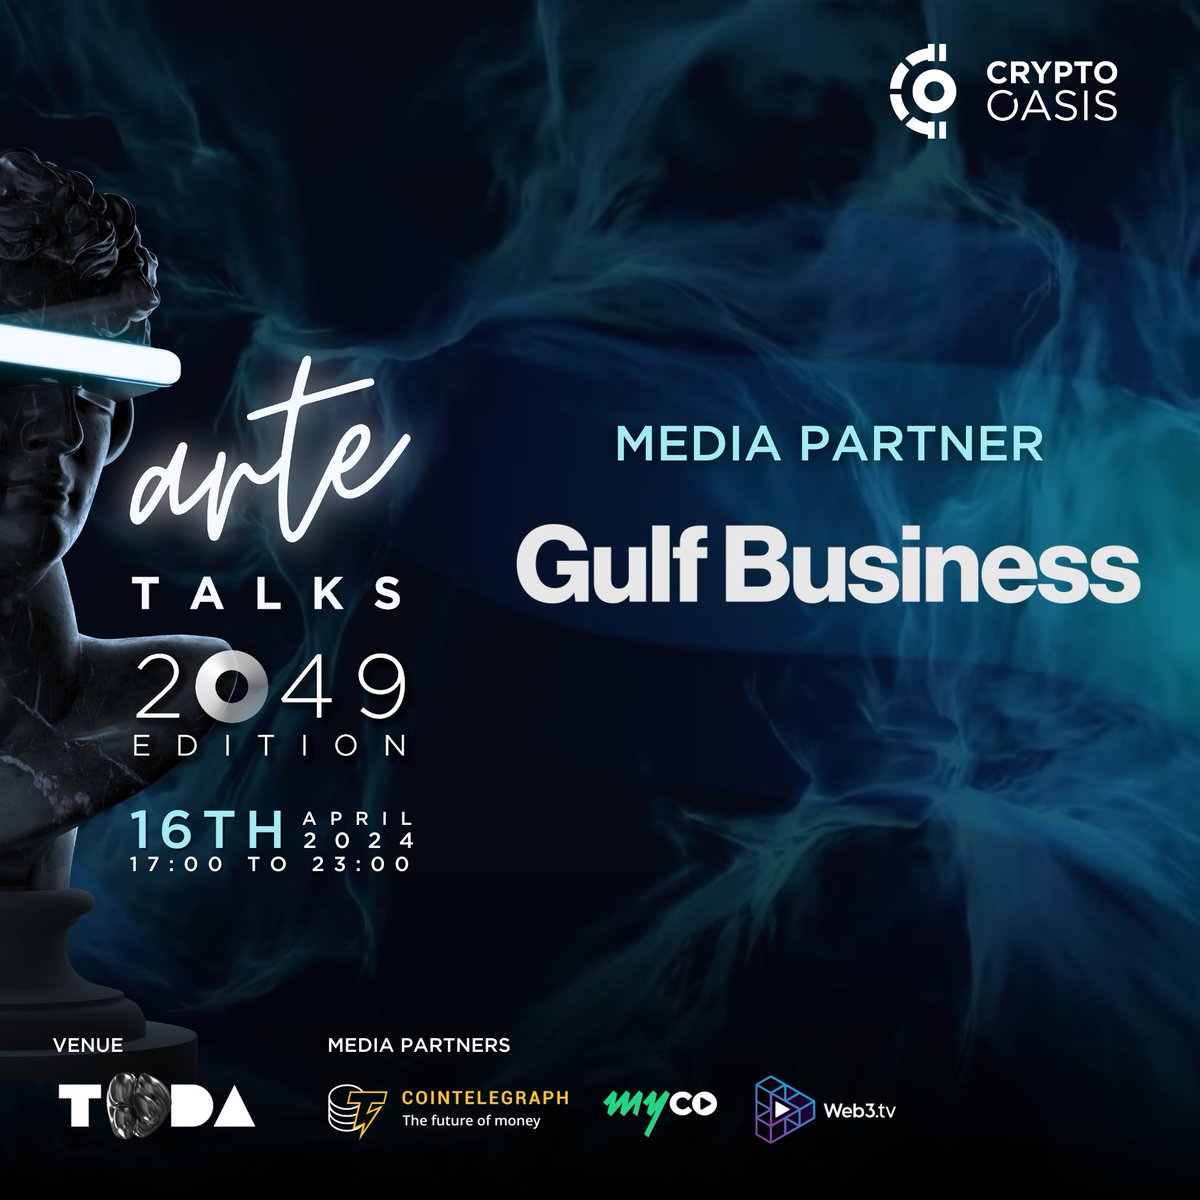 We are thrilled to announce @GulfBusiness as the Media Partner for the upcoming arte Talks 2049 edition!

Join us for an exciting exploration of Web3, the metaverse, and crypto!

📅Tue, April 16th
📍@TODADXB
🎟️t.ly/cDh8v

Learn more: t.ly/oEmLv